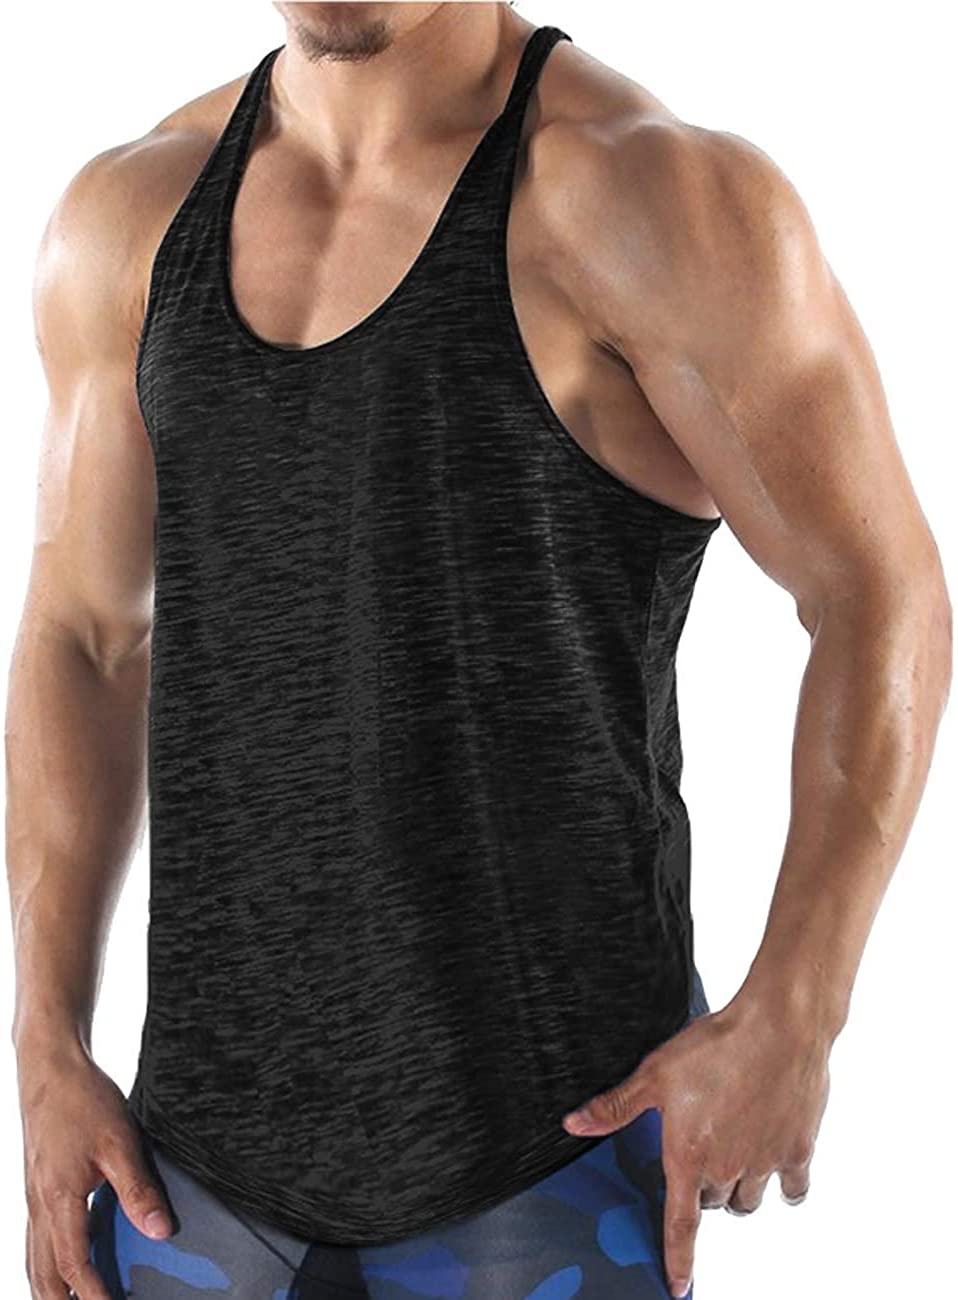 COOFANDY Men's Gym Tank Tops Workout Muscle Tee Training Bodybuilding  Fitness T | eBay